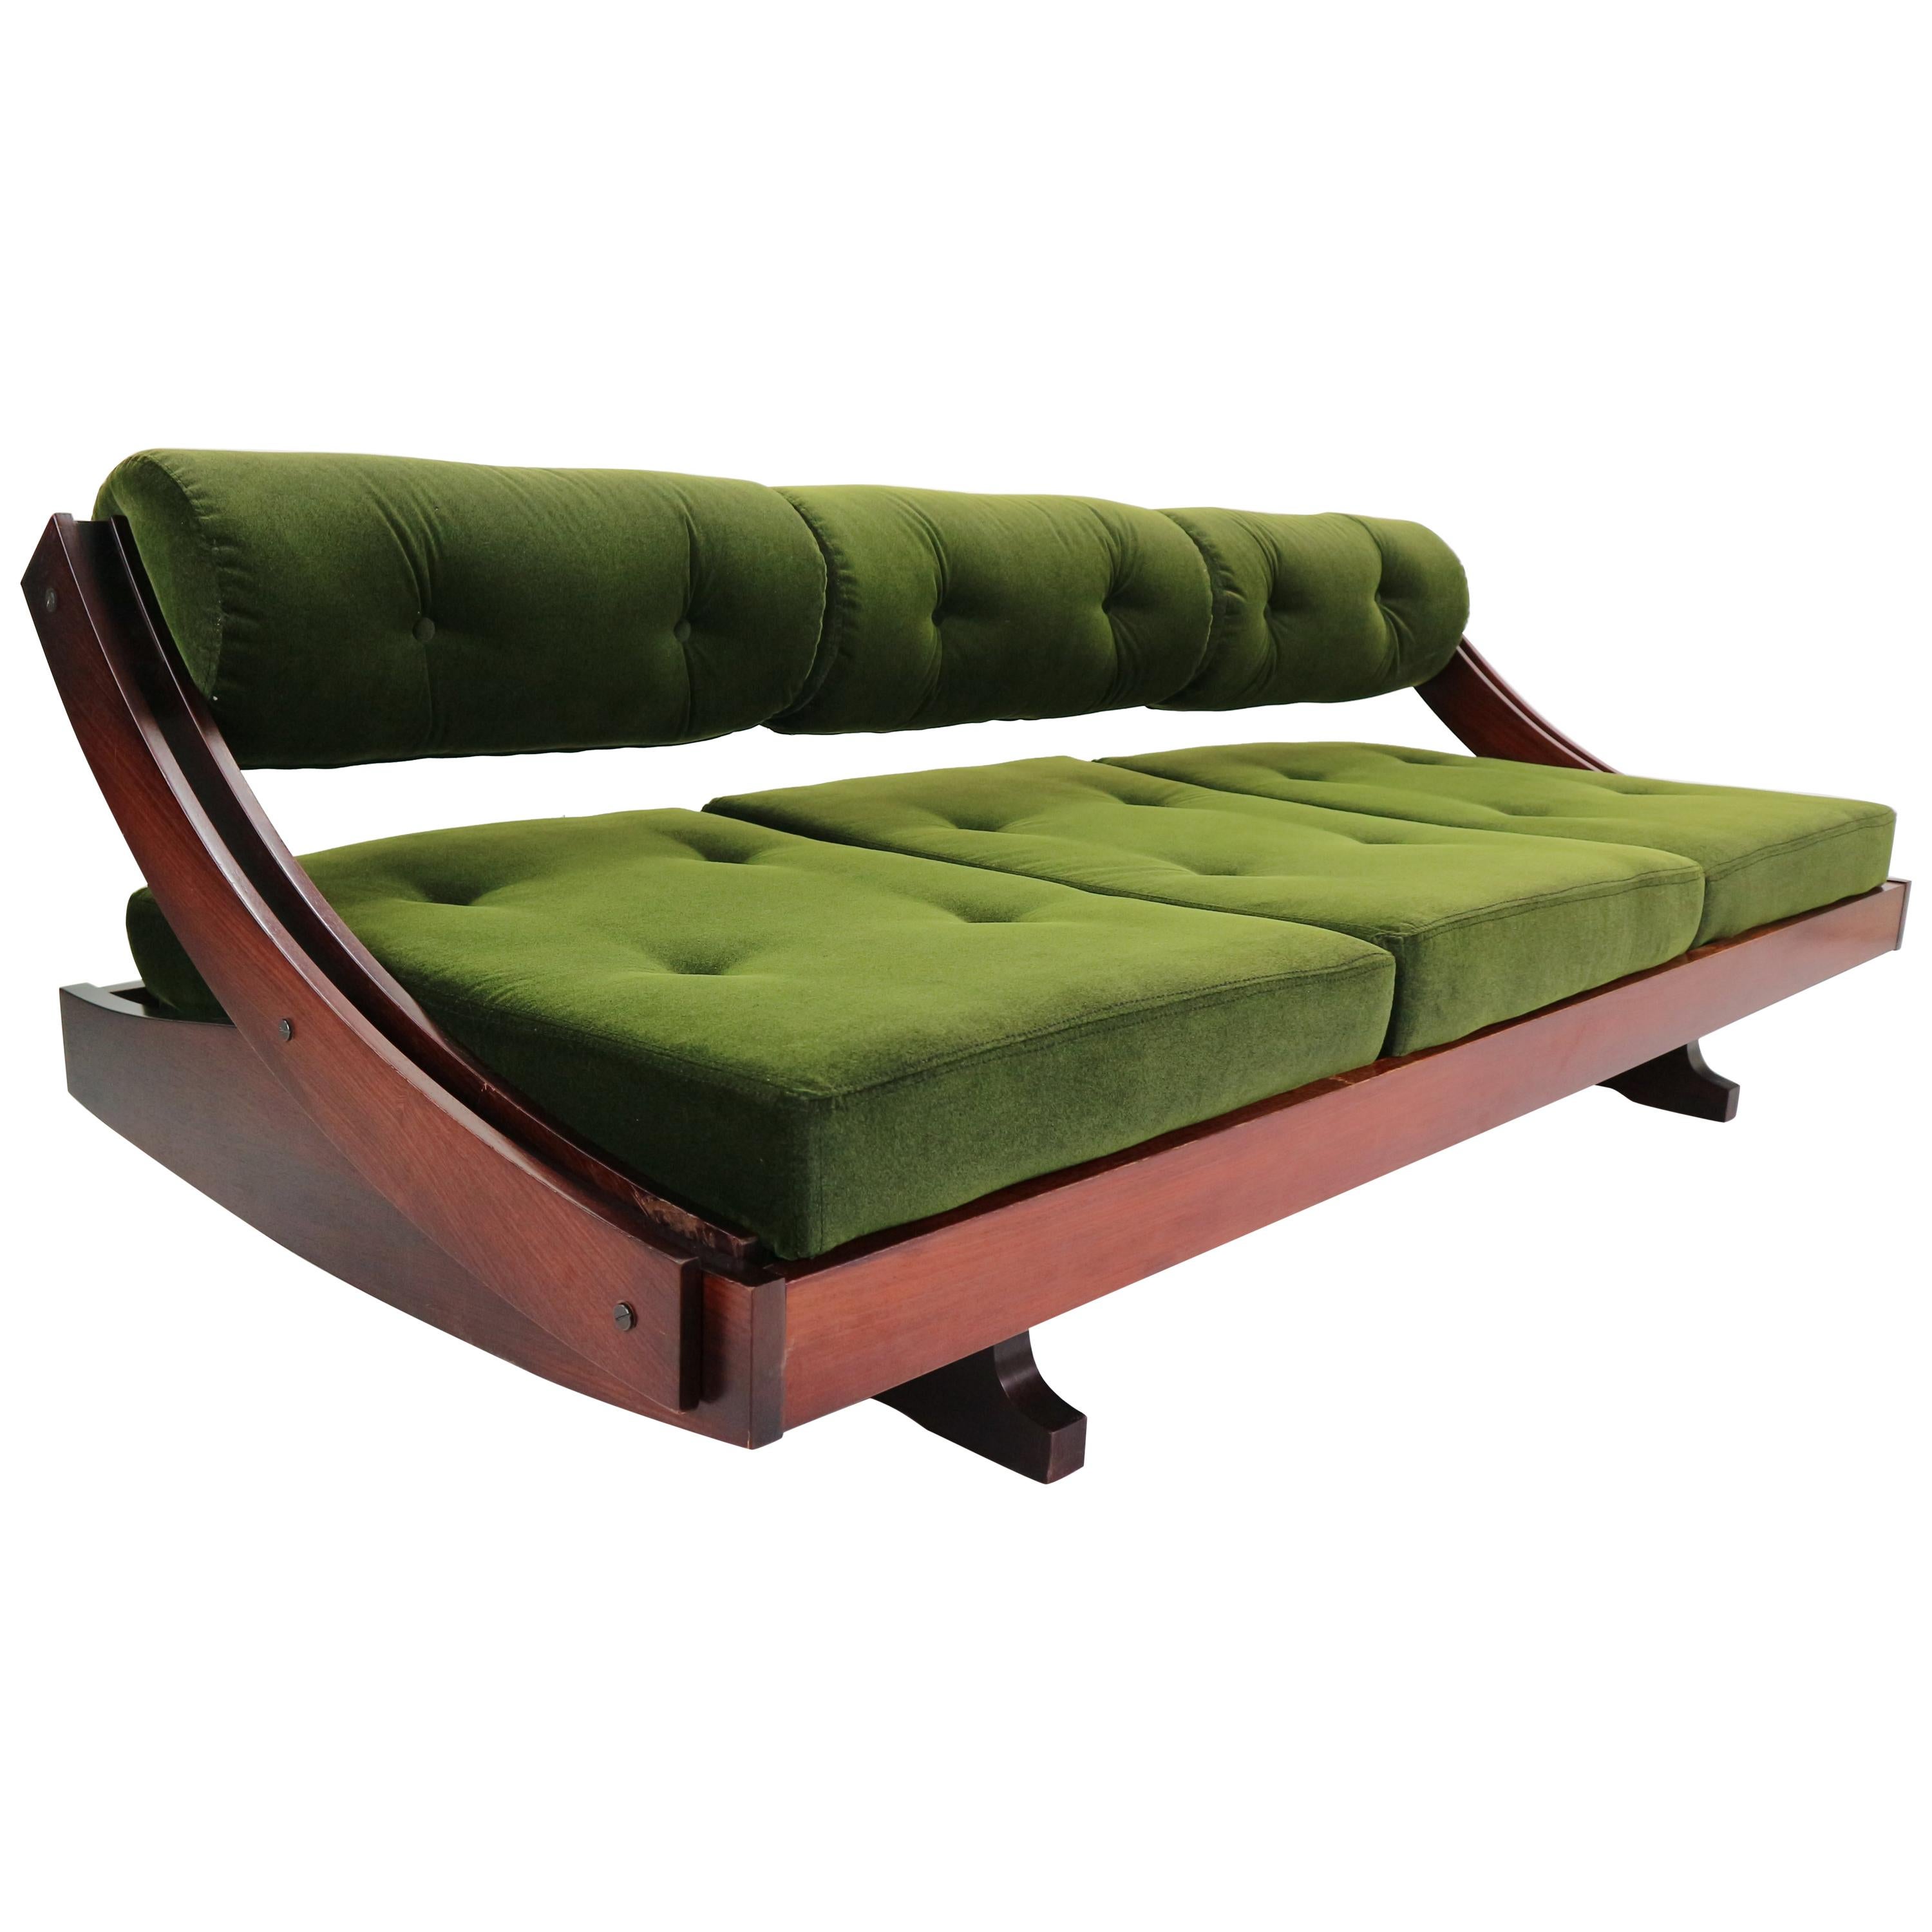 Gianni Songia GS195 Daybed, Sleeping Sofa for Sormani, Italy, 1970s